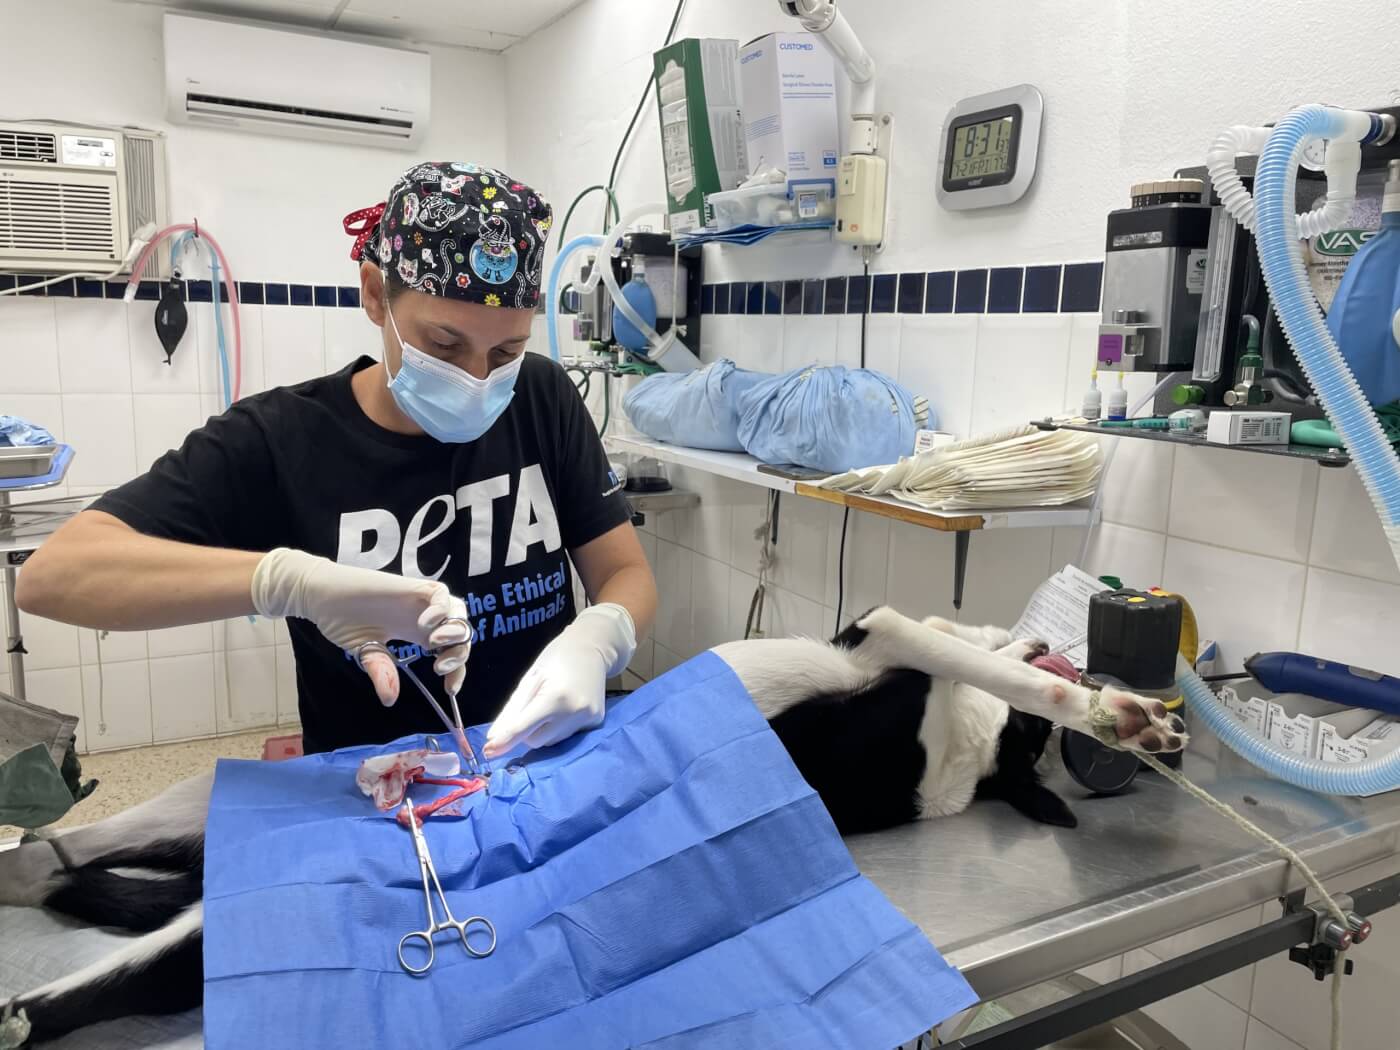 A PETA veterinary surgeon in the operating room, performing surgery on an anesthetized dog.